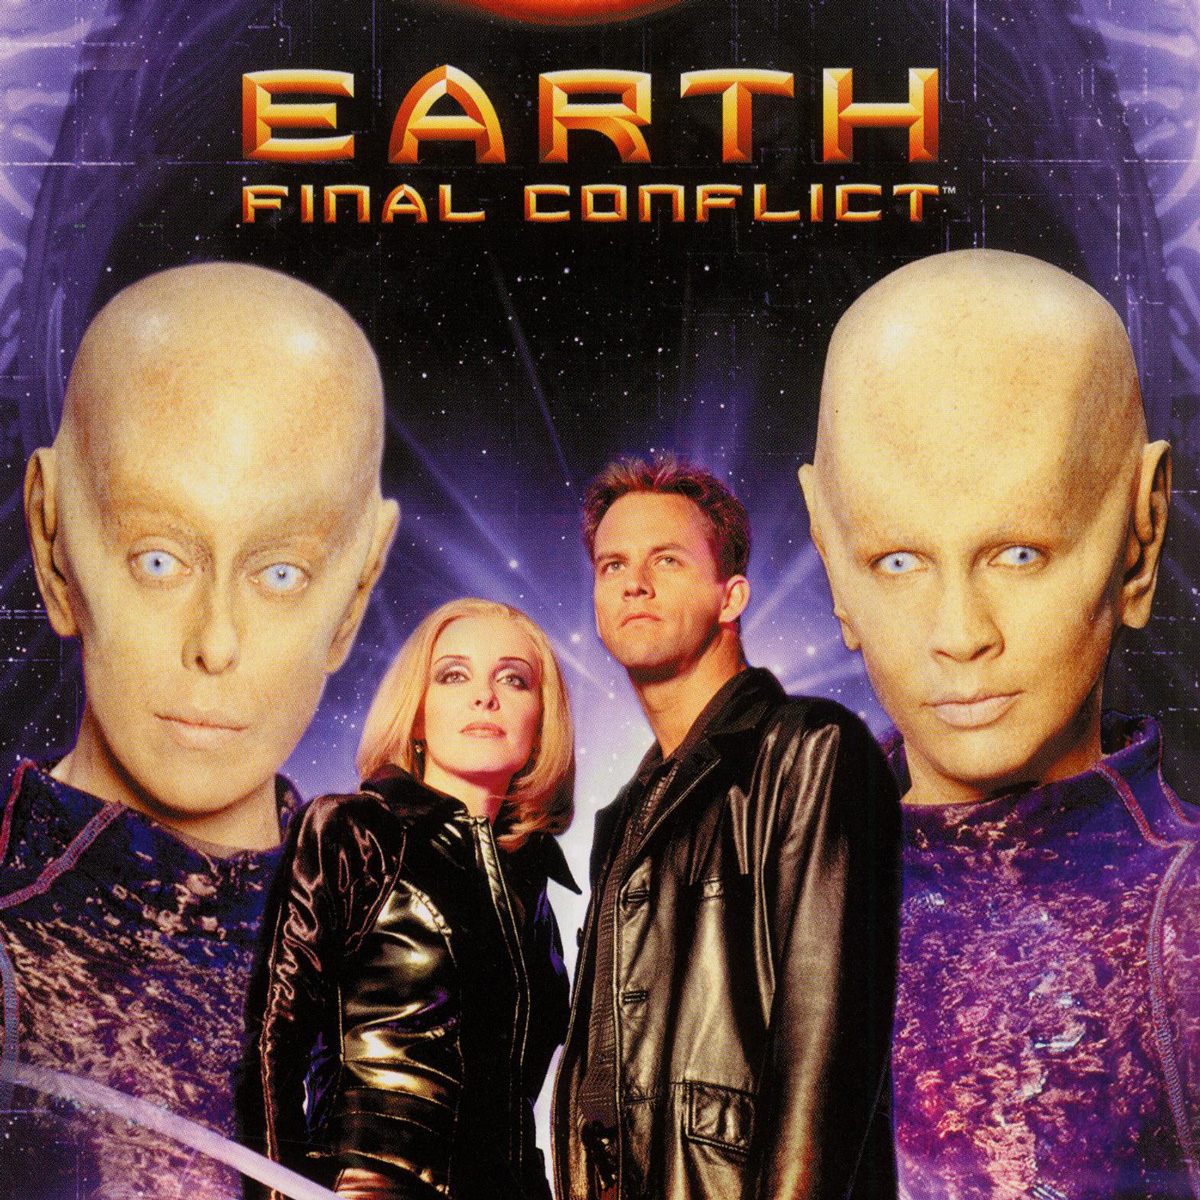 Poster from “Earth: Final Conflict”